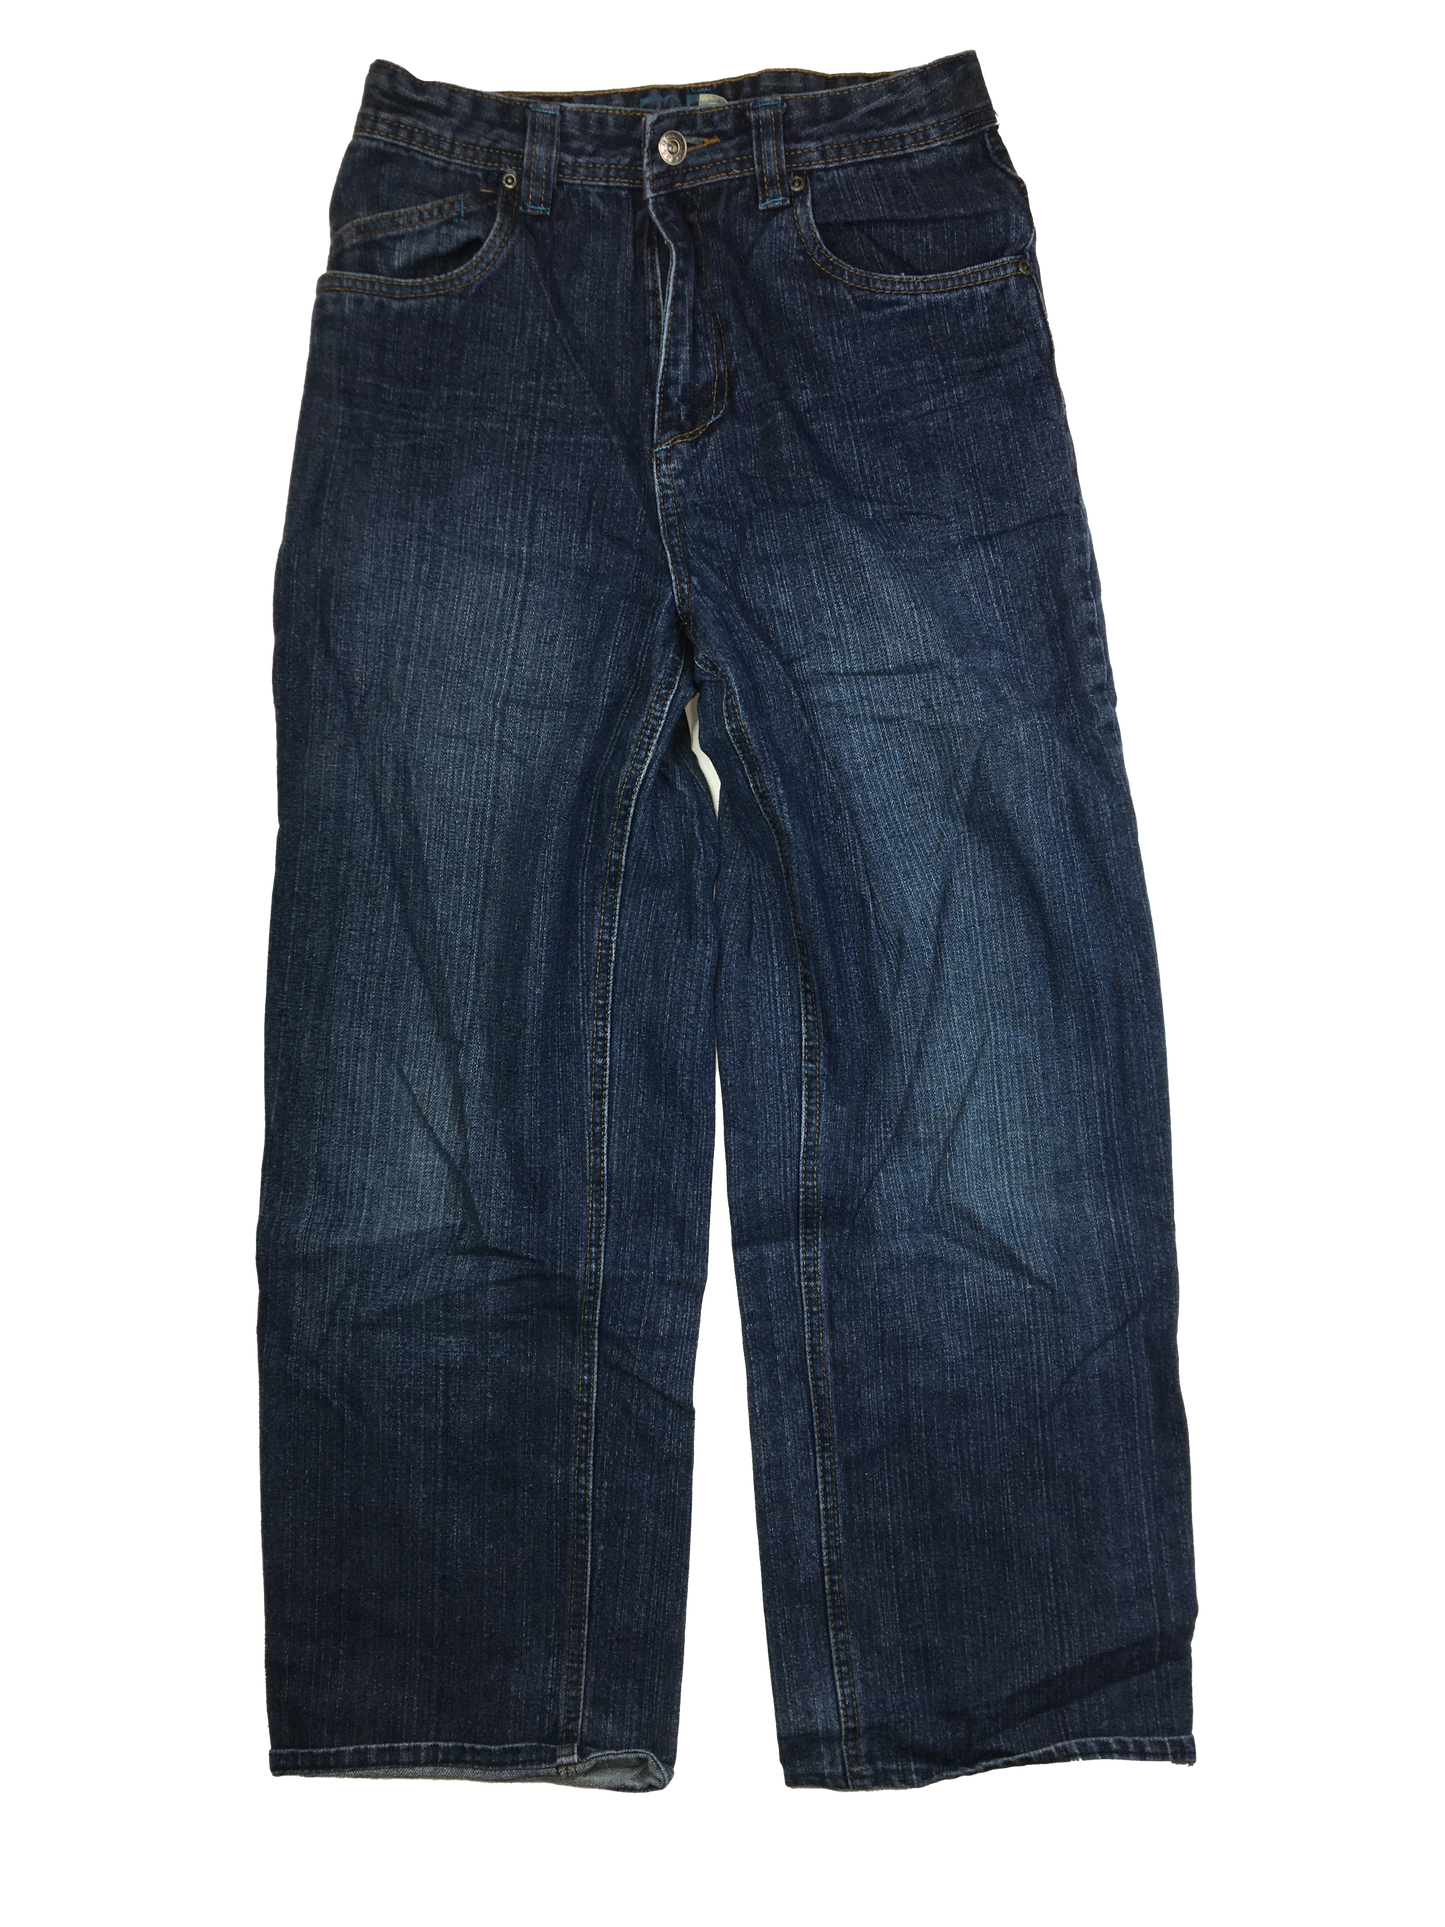 725 Wide Leg Dark Wash Jeans with Embroidered Pockets 16